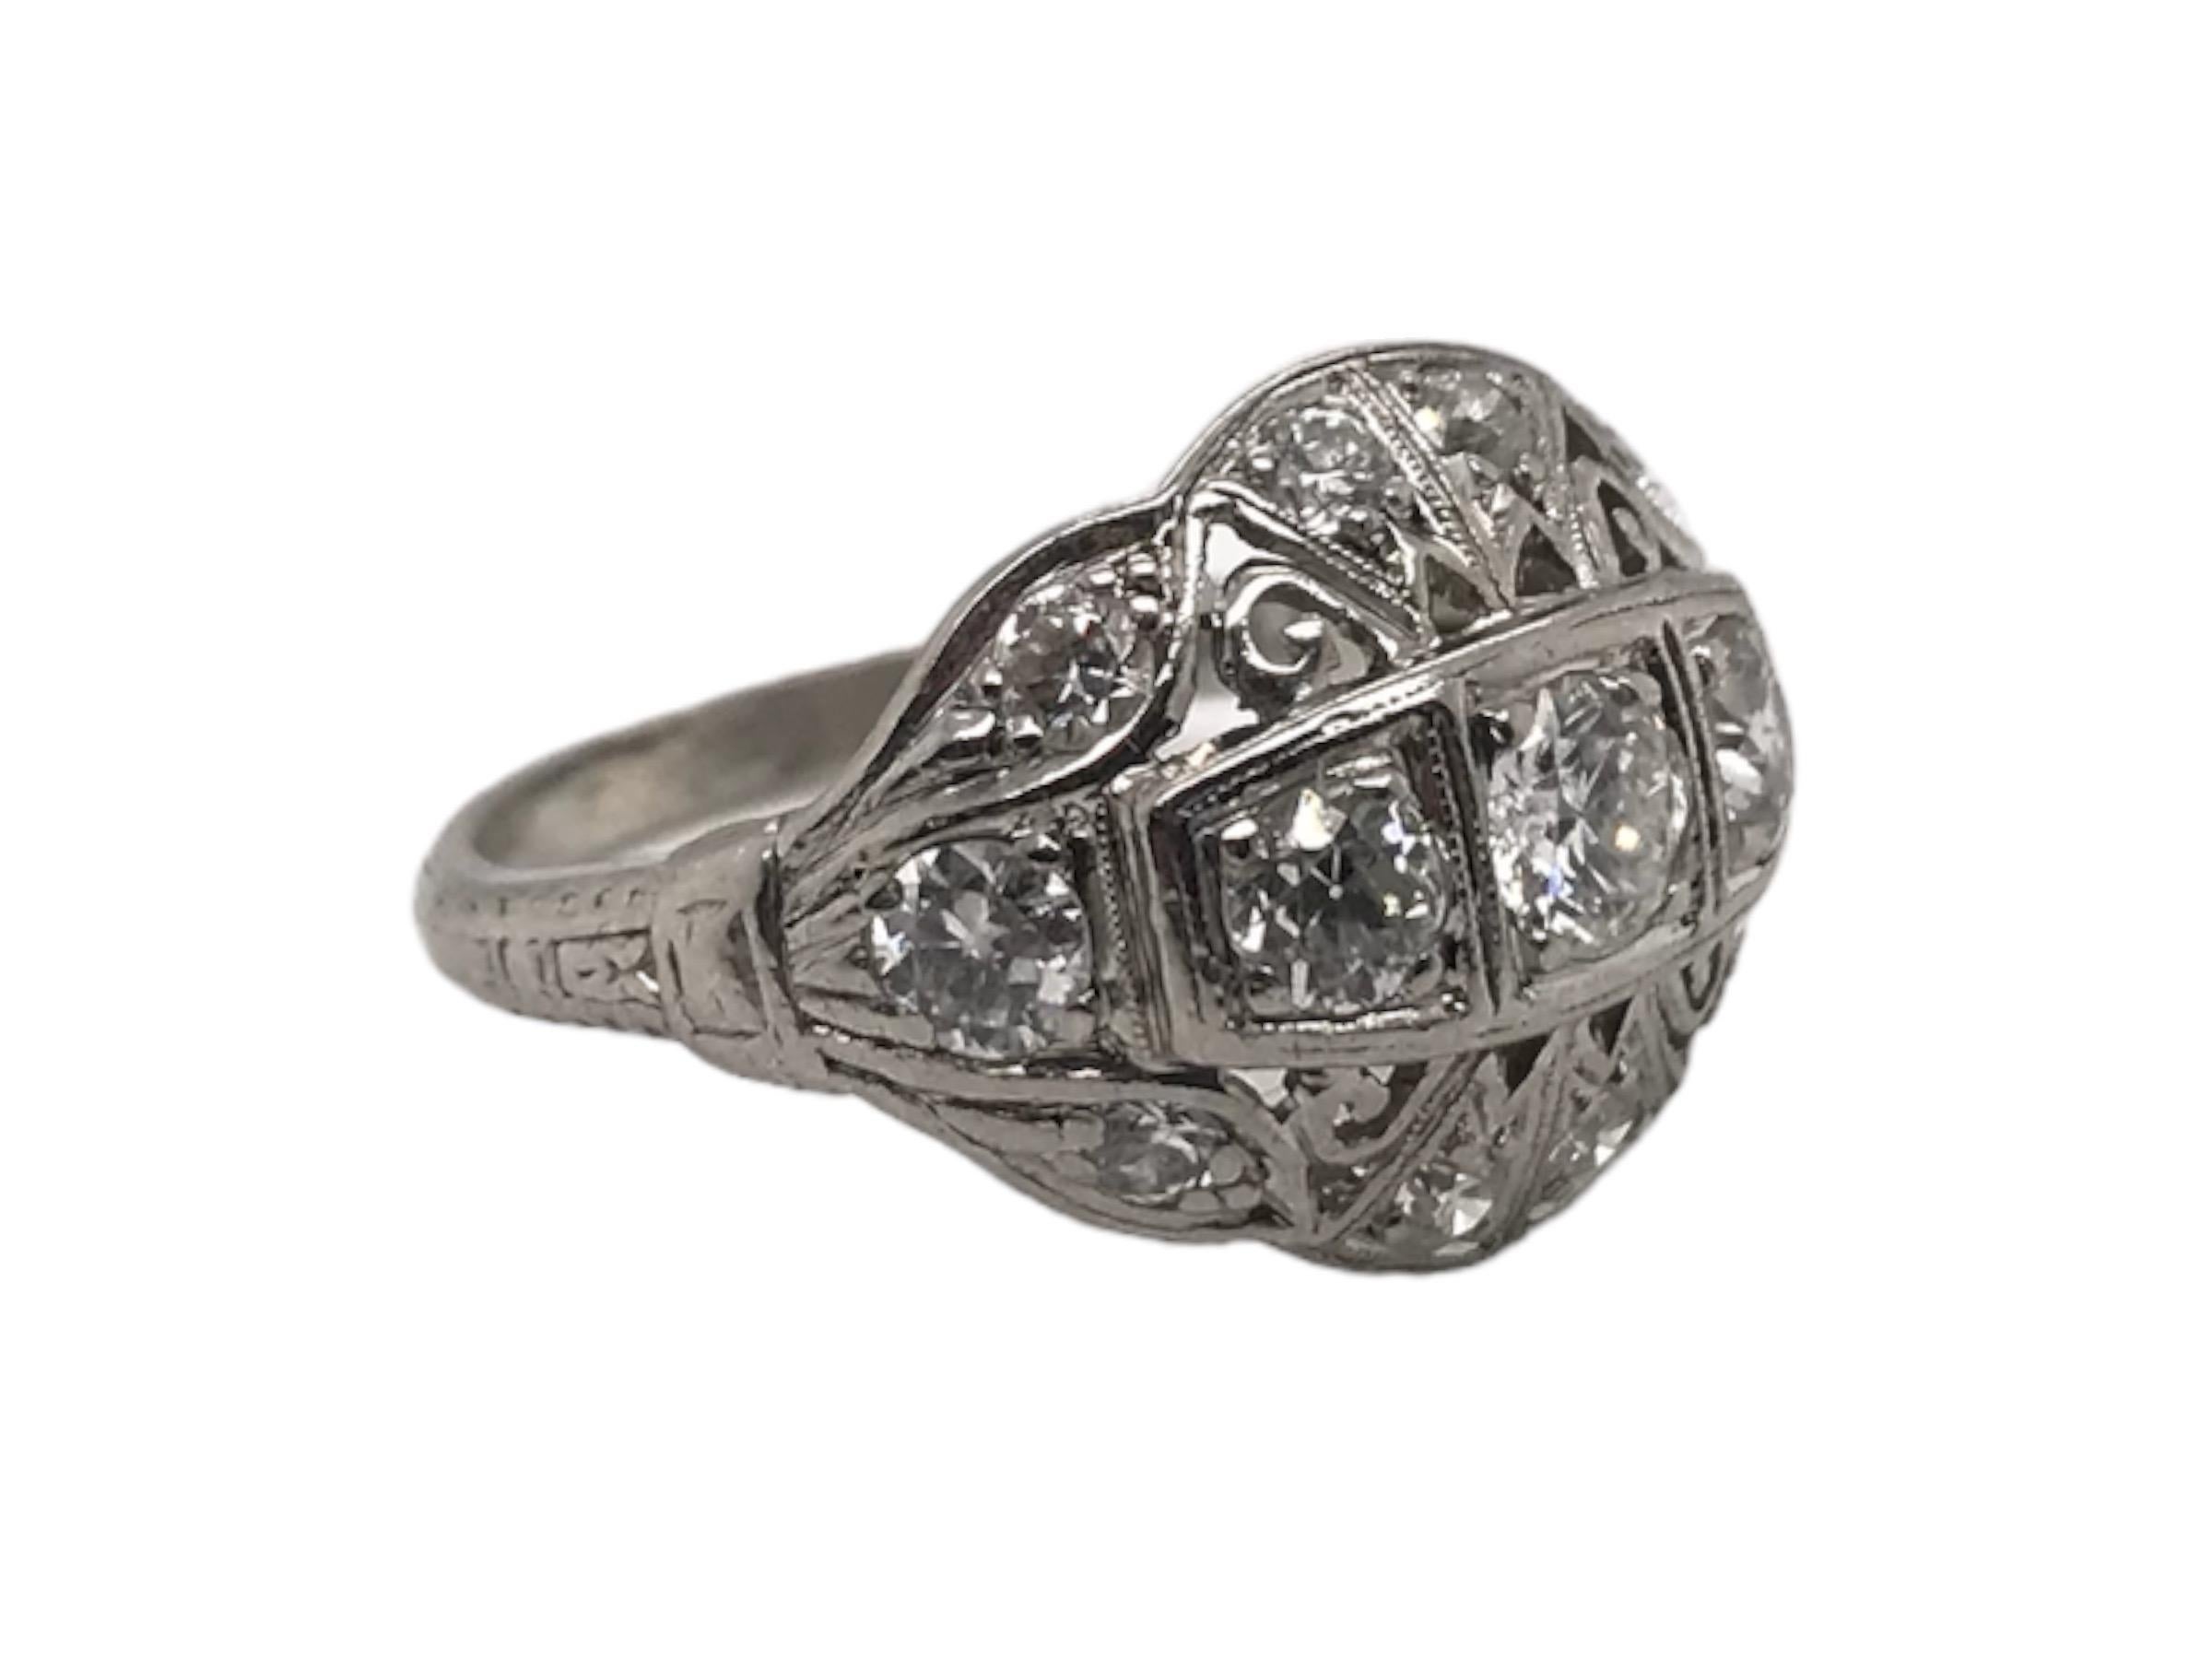 This lovely ring is absolutely perfect for everyday wear!
This beauty features a timeless shield design & is accented by 13 Old European Cut diamonds.
The design sit nice and low to the finger and is has exceptional scroll style filigree